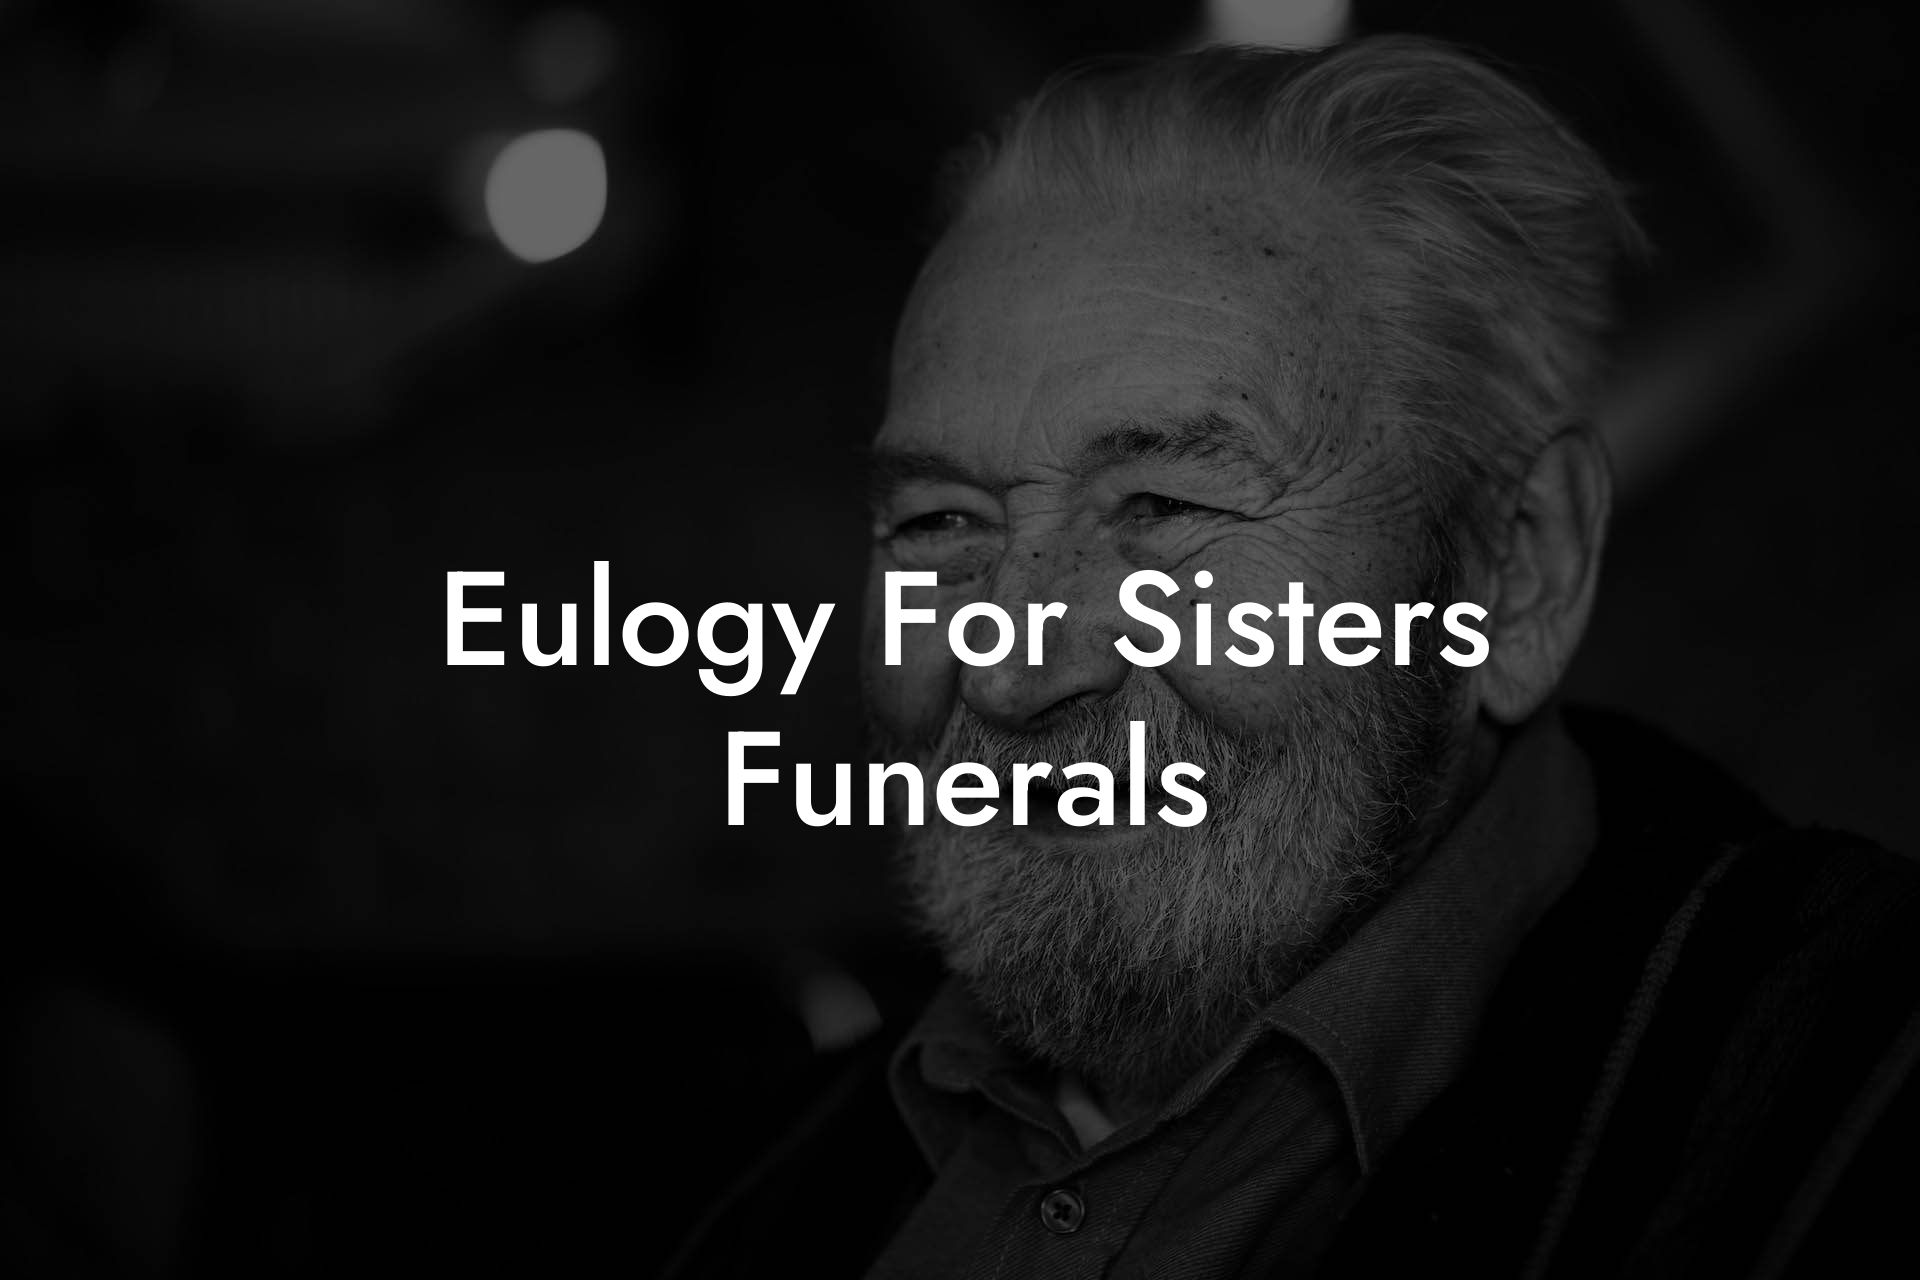 Eulogy For Sisters Funerals